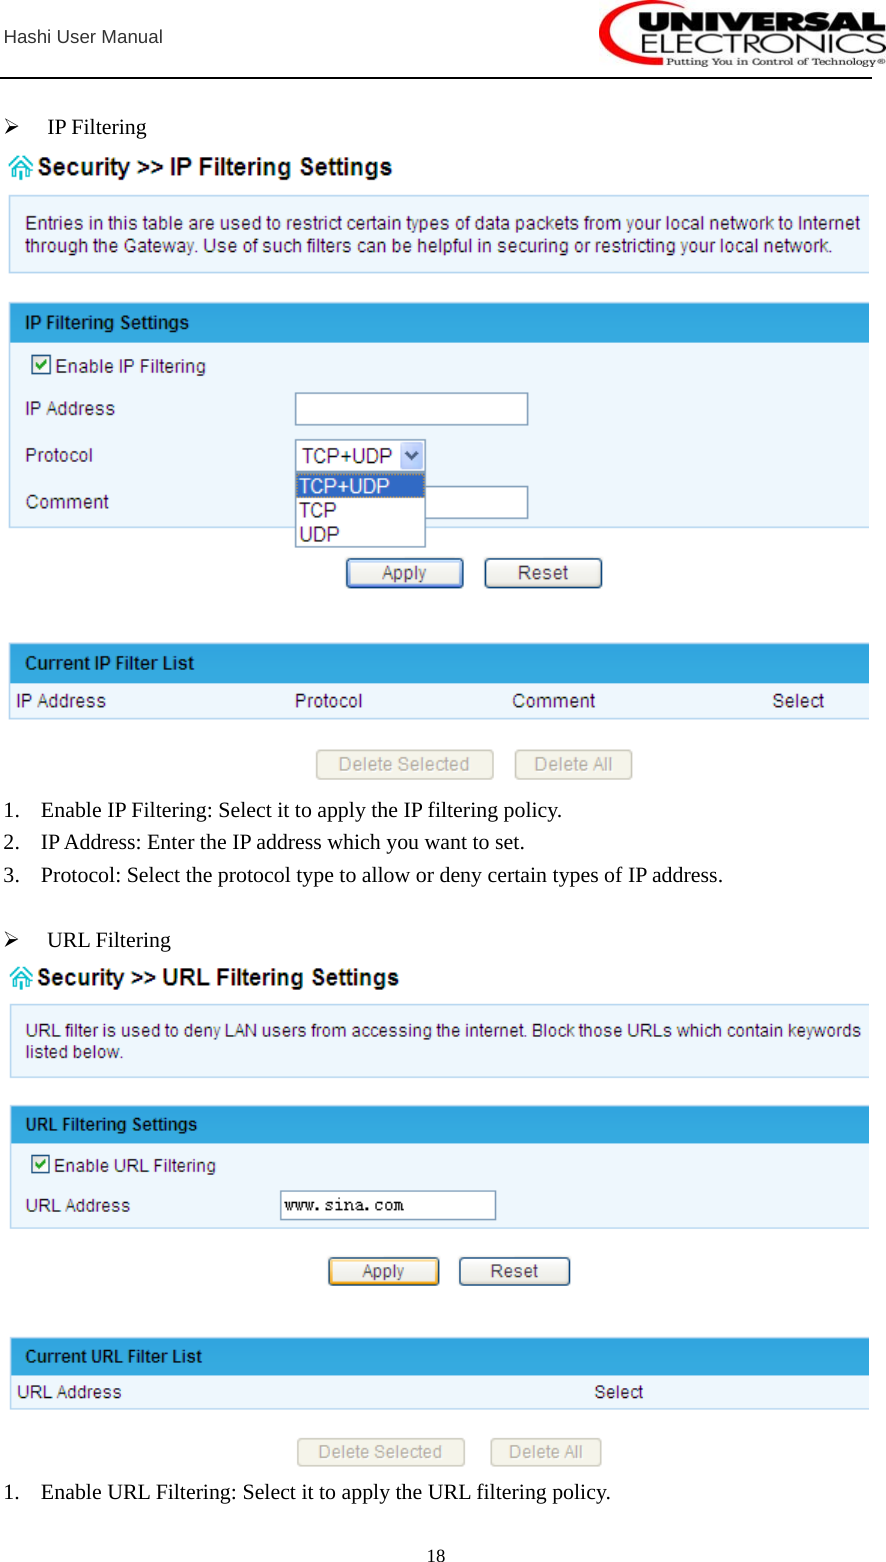  Hashi User Manual  18 ¾ IP Filtering  1. Enable IP Filtering: Select it to apply the IP filtering policy. 2. IP Address: Enter the IP address which you want to set. 3. Protocol: Select the protocol type to allow or deny certain types of IP address.  ¾ URL Filtering  1. Enable URL Filtering: Select it to apply the URL filtering policy. 